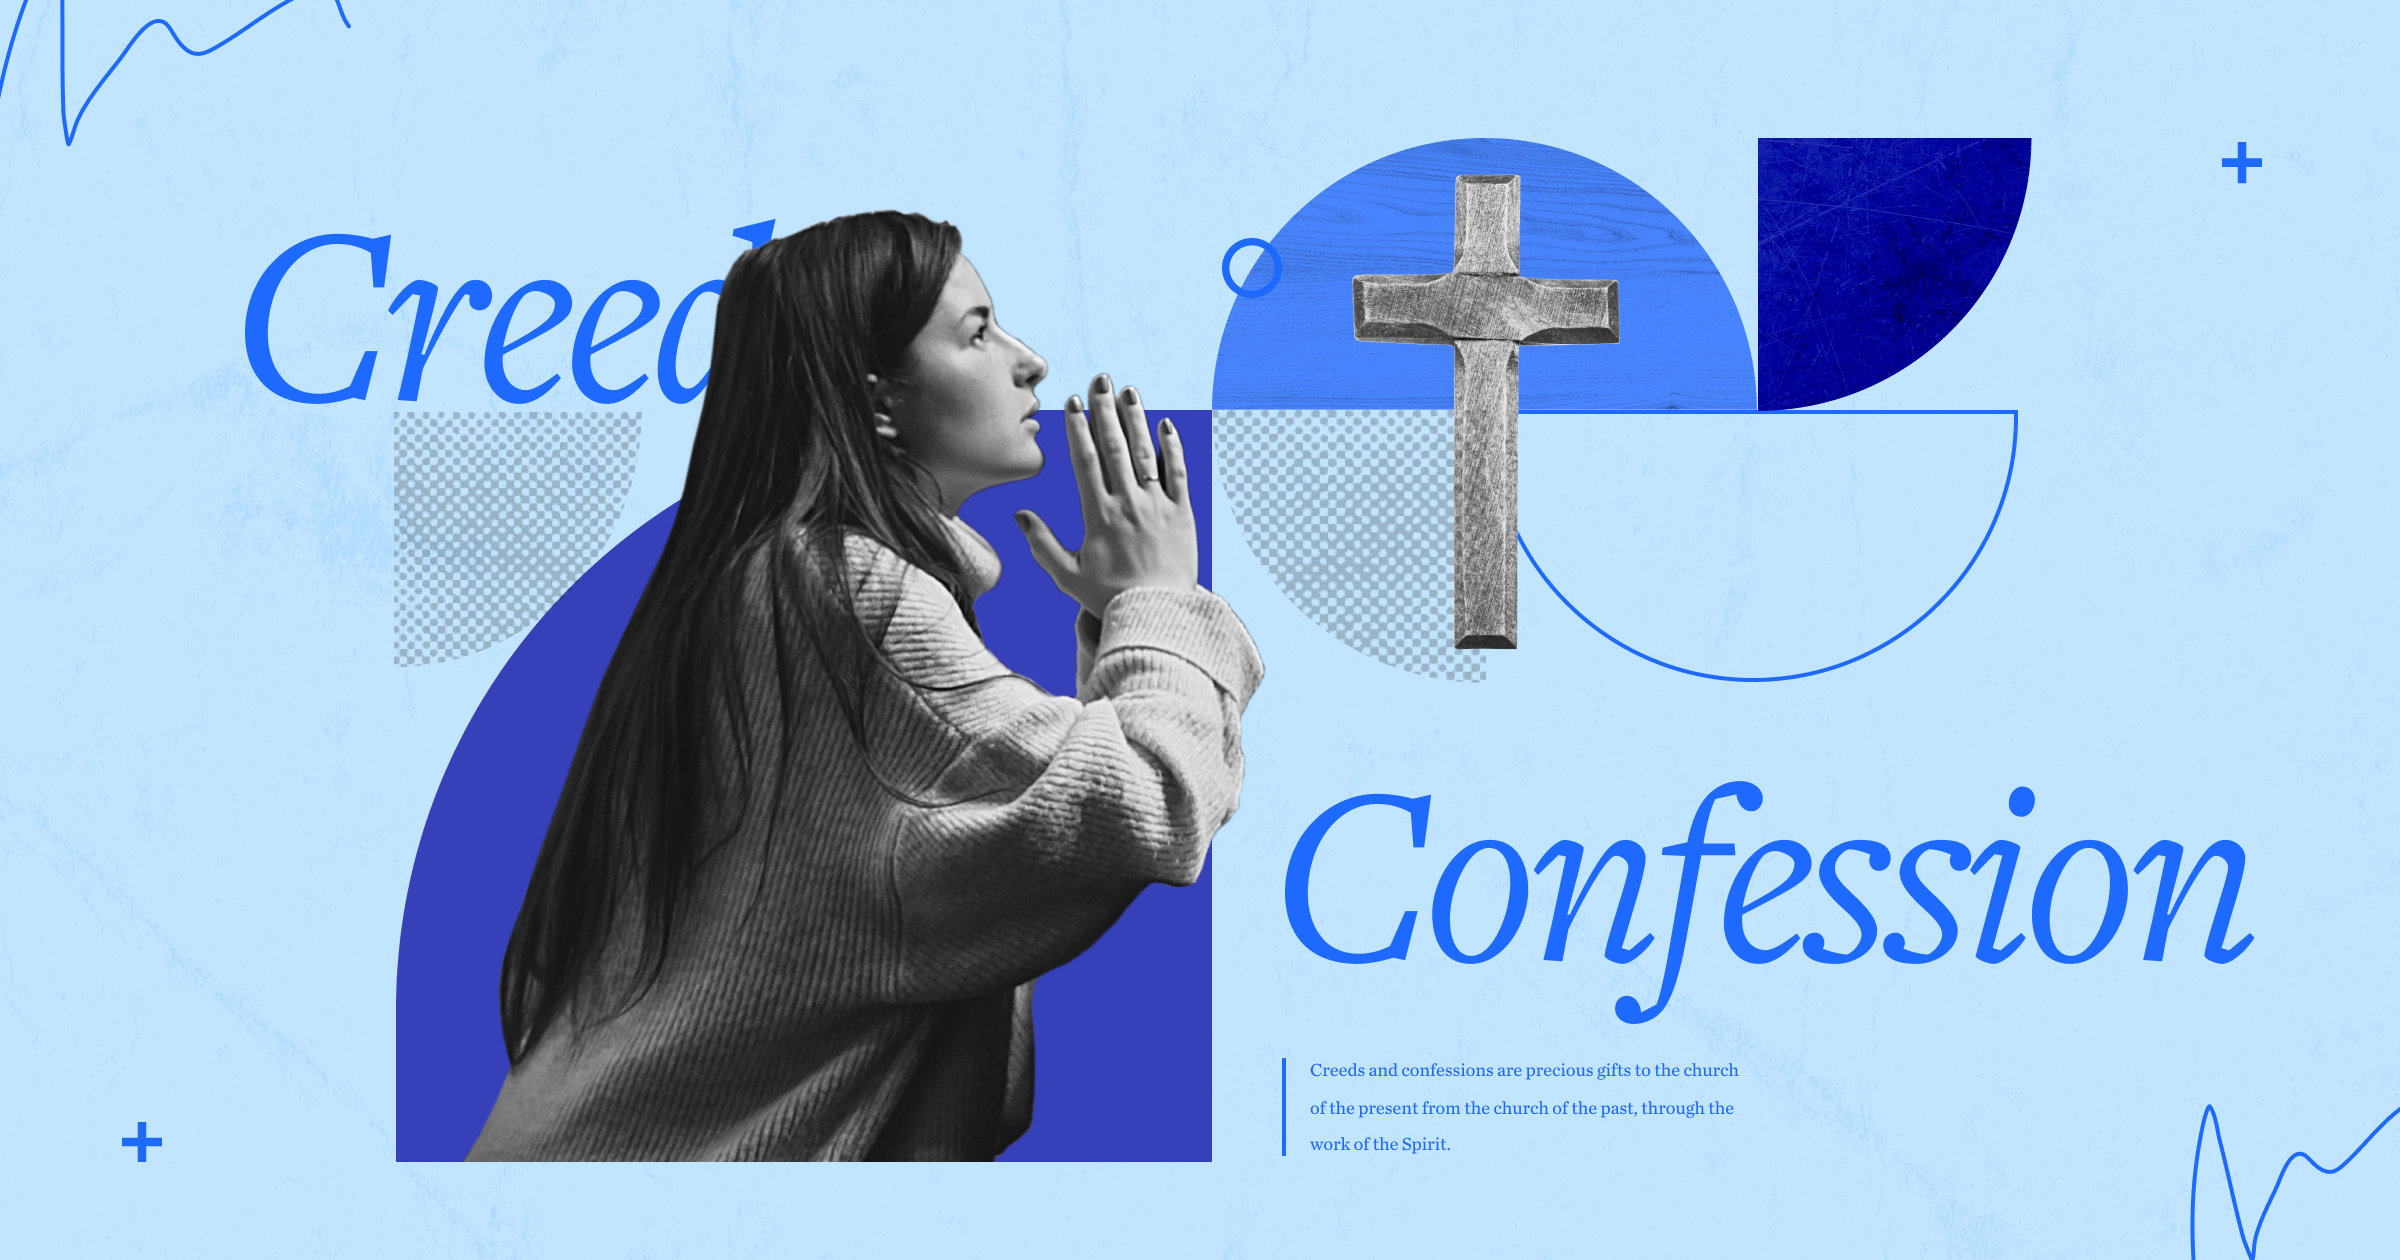 An image of a woman praying, a cross, and the words creed and confession on the sides.